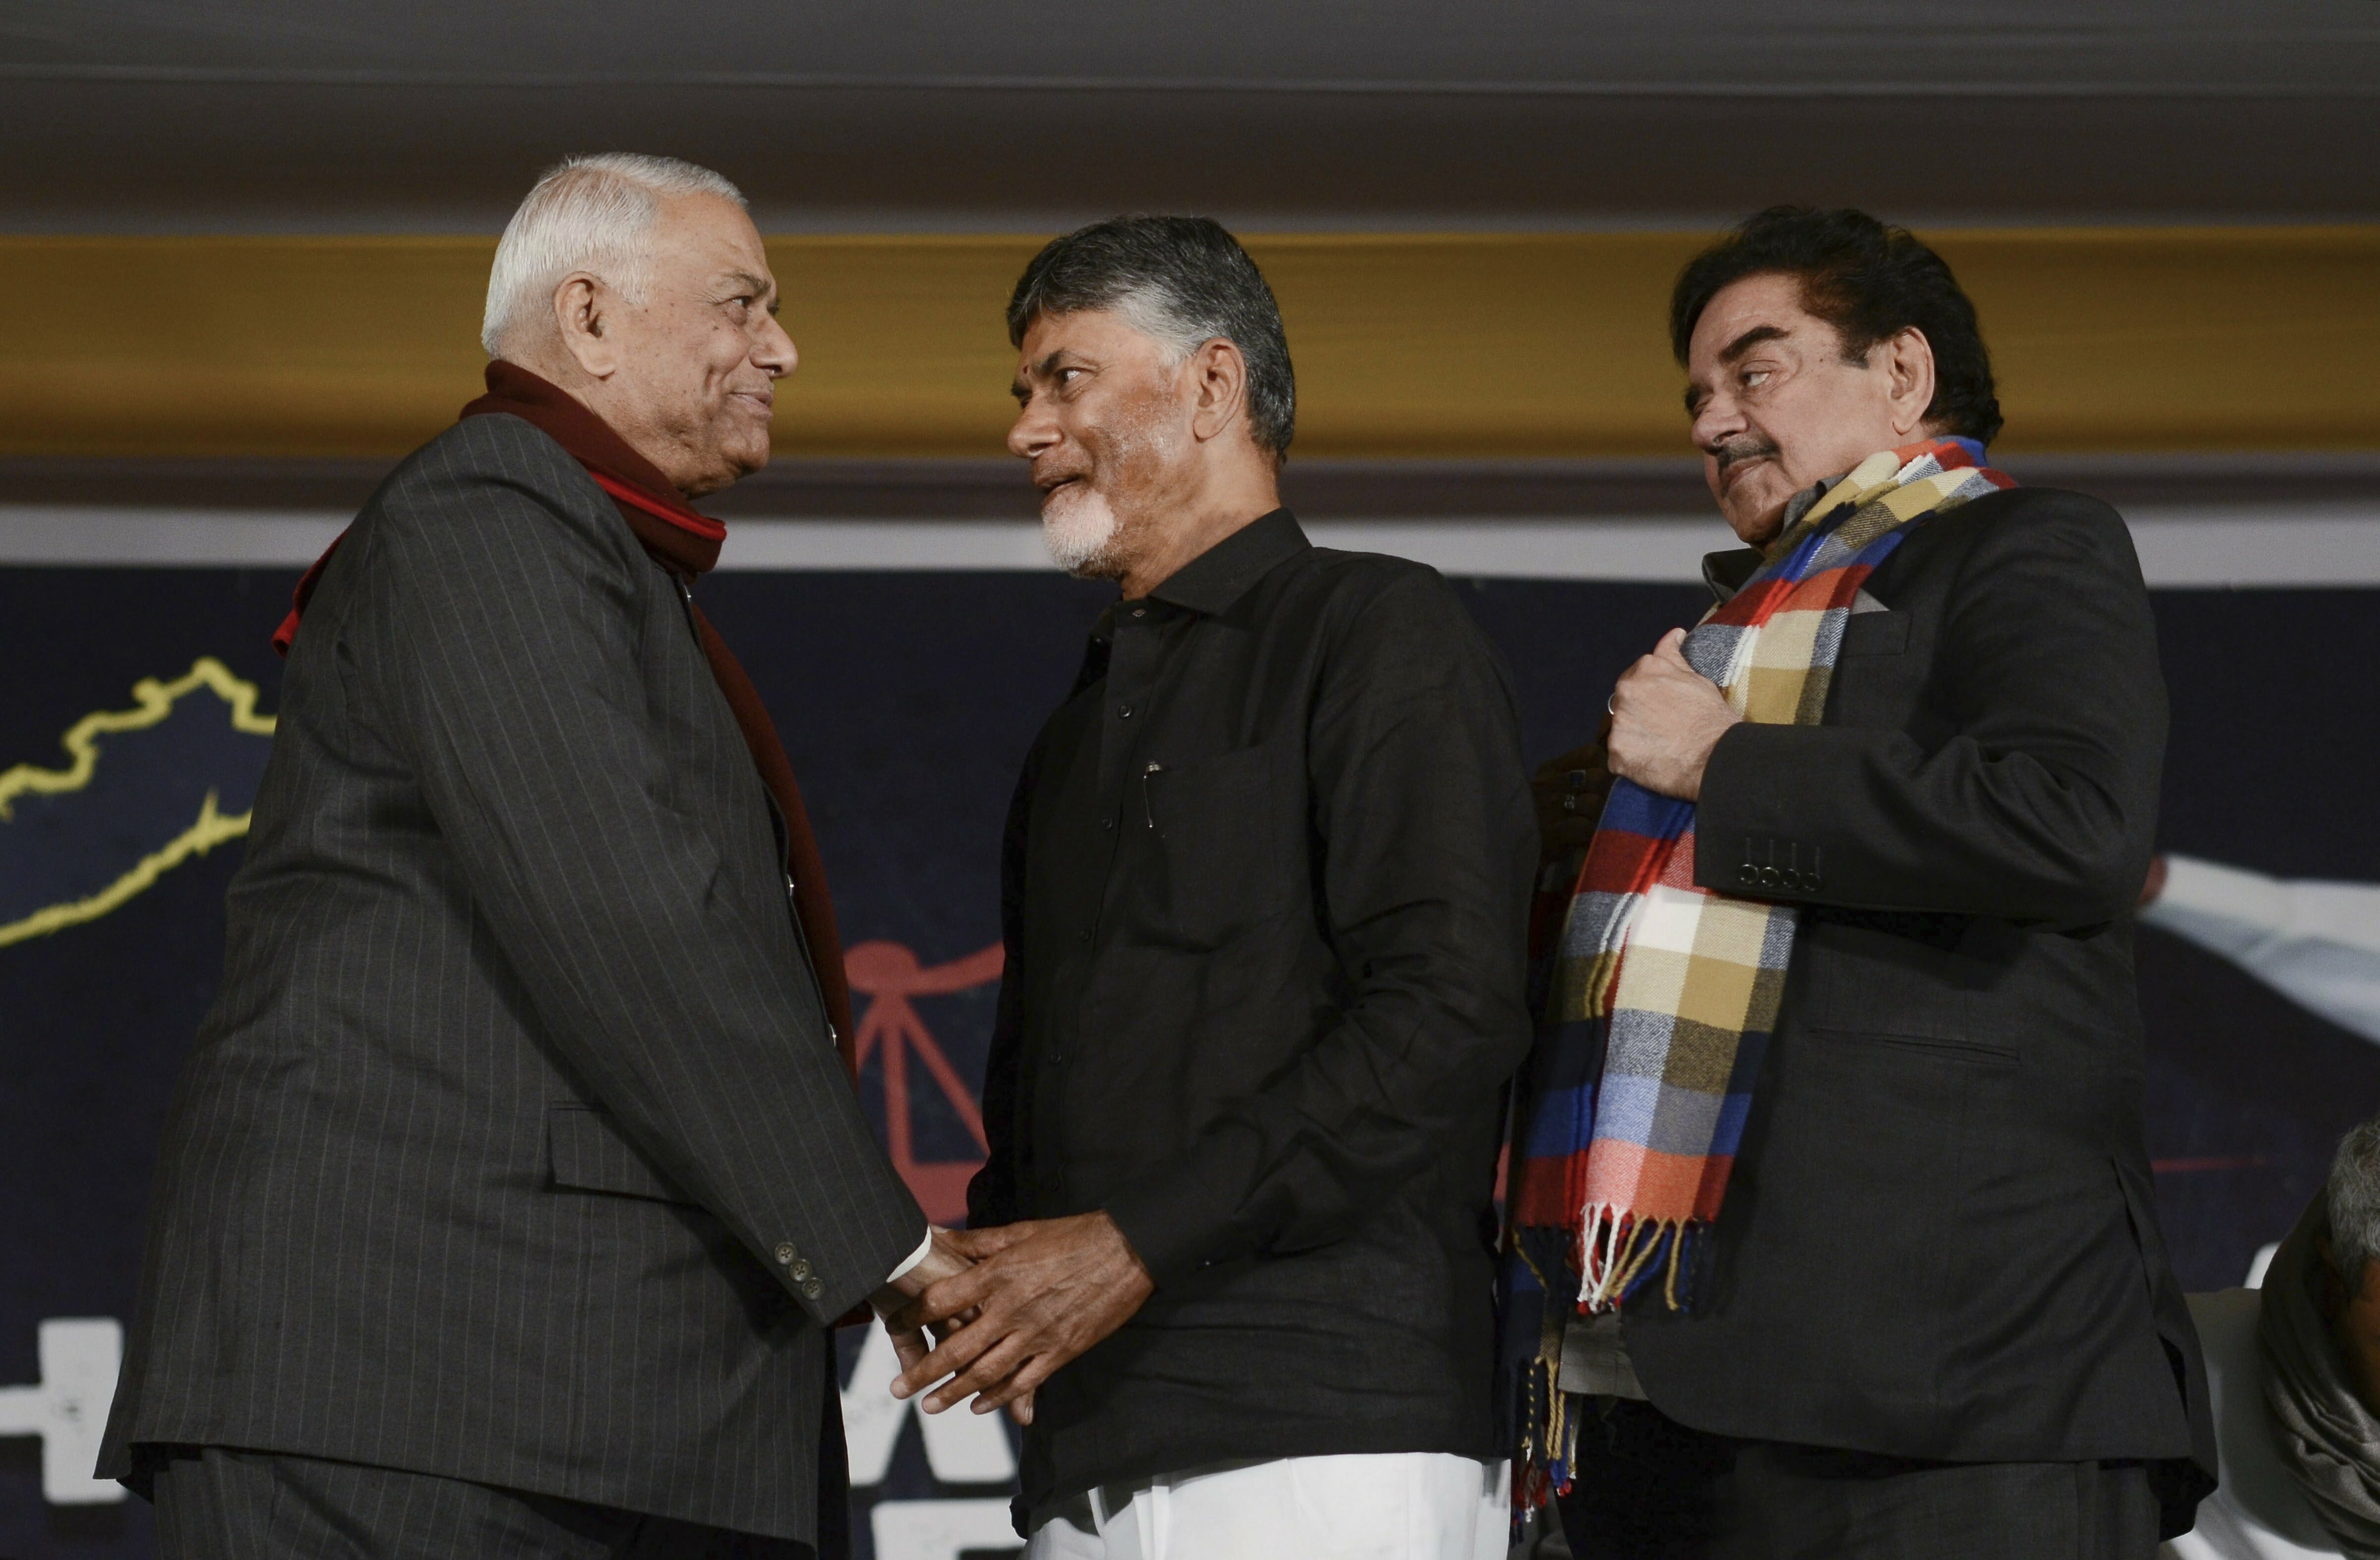 Former Union minister Yashwant Sinha and BJP MP Shatrughan Sinha extend their support to Andhra Pradesh Chief Minister Chandrababu Naidu during his day-long fast 'Dharma Porata Deeksha' demanding for the special status to the state of Andhra Pradesh, in New Delhi - PTI